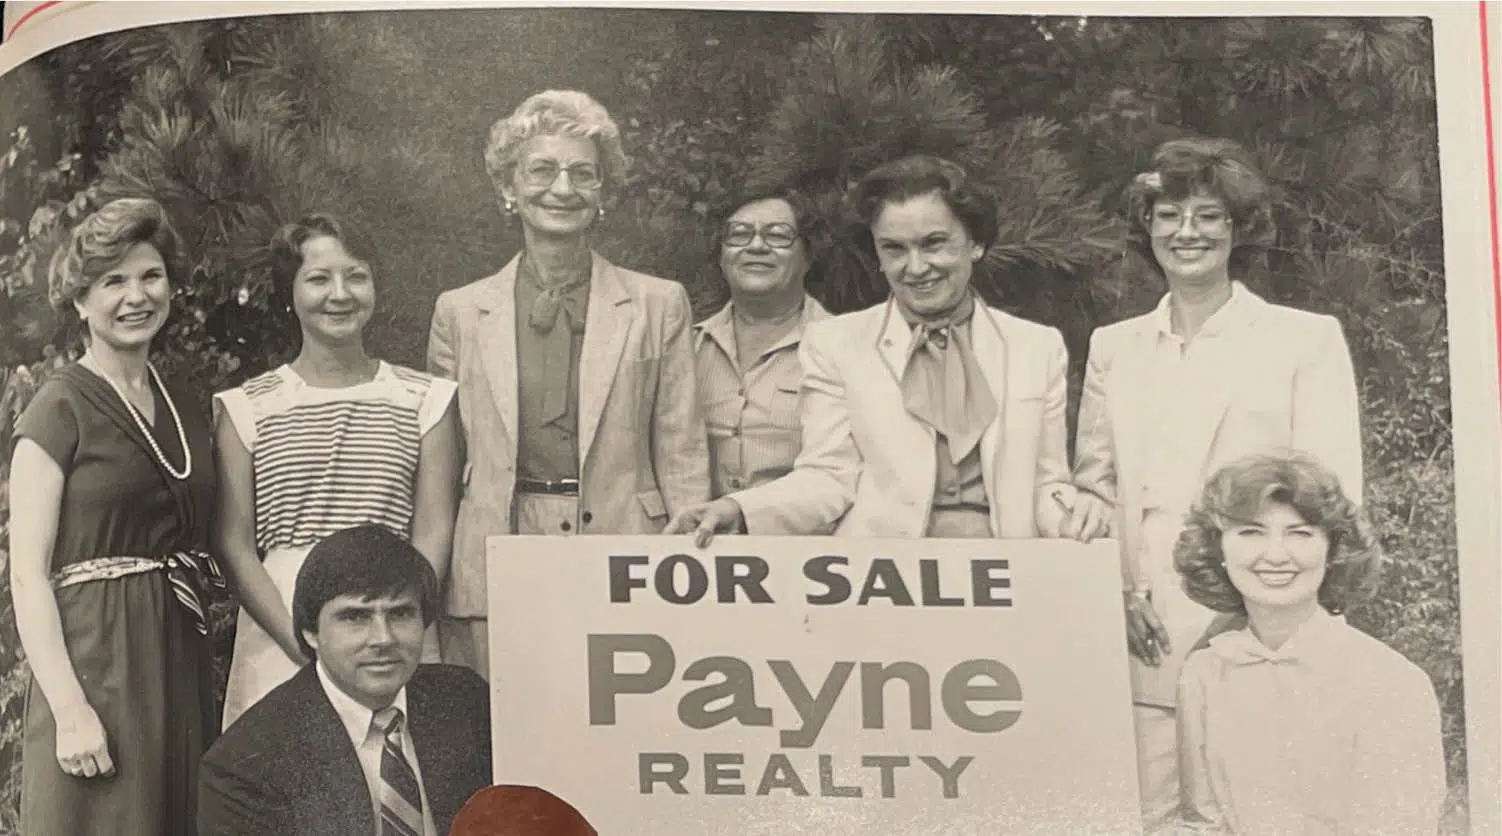 For Sale Payne Realty